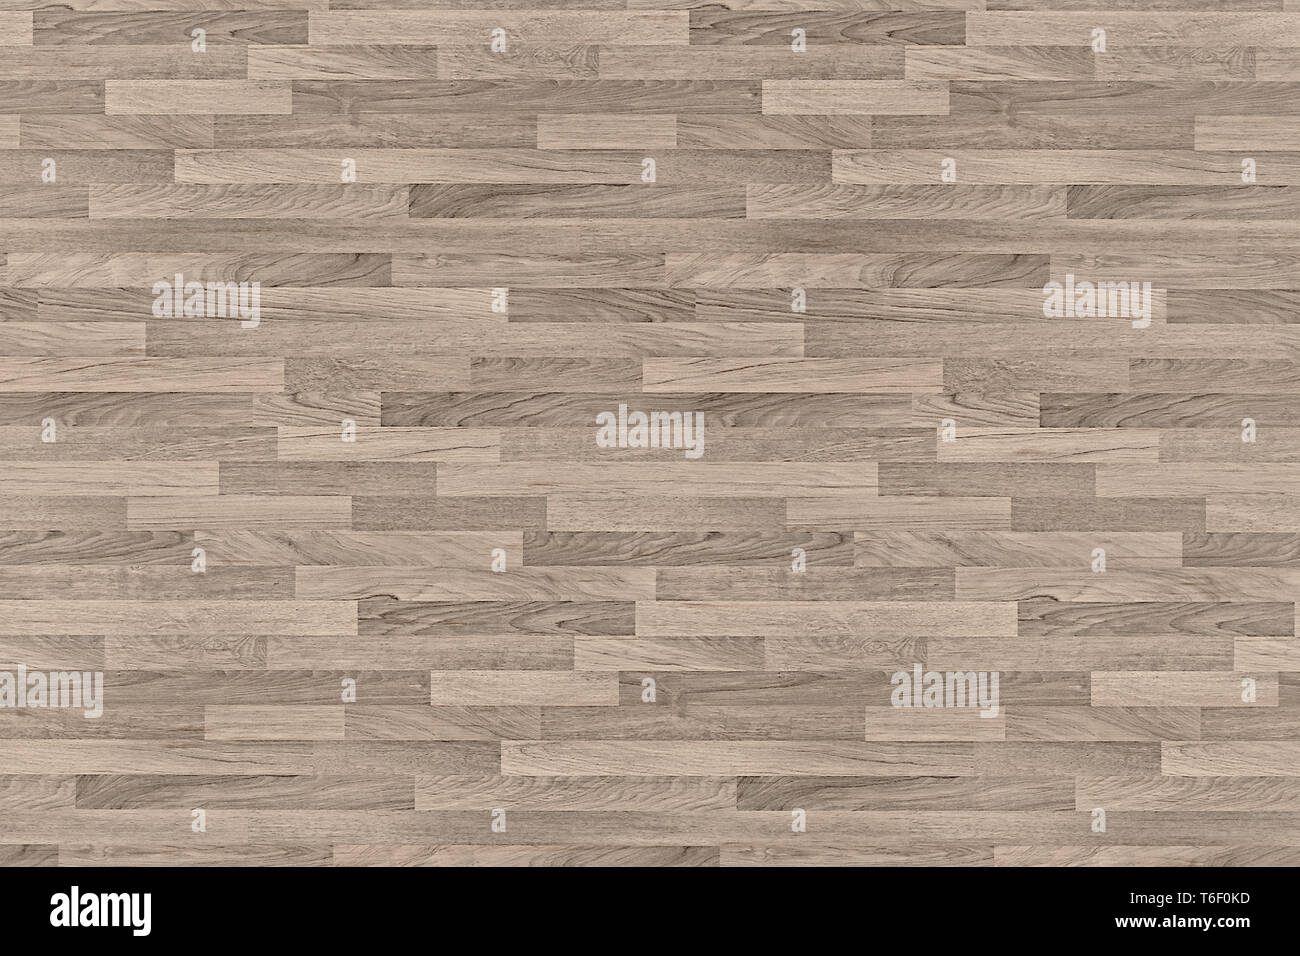 Parquet Flooring Texture High Resolution Stock Photography And Images Alamy